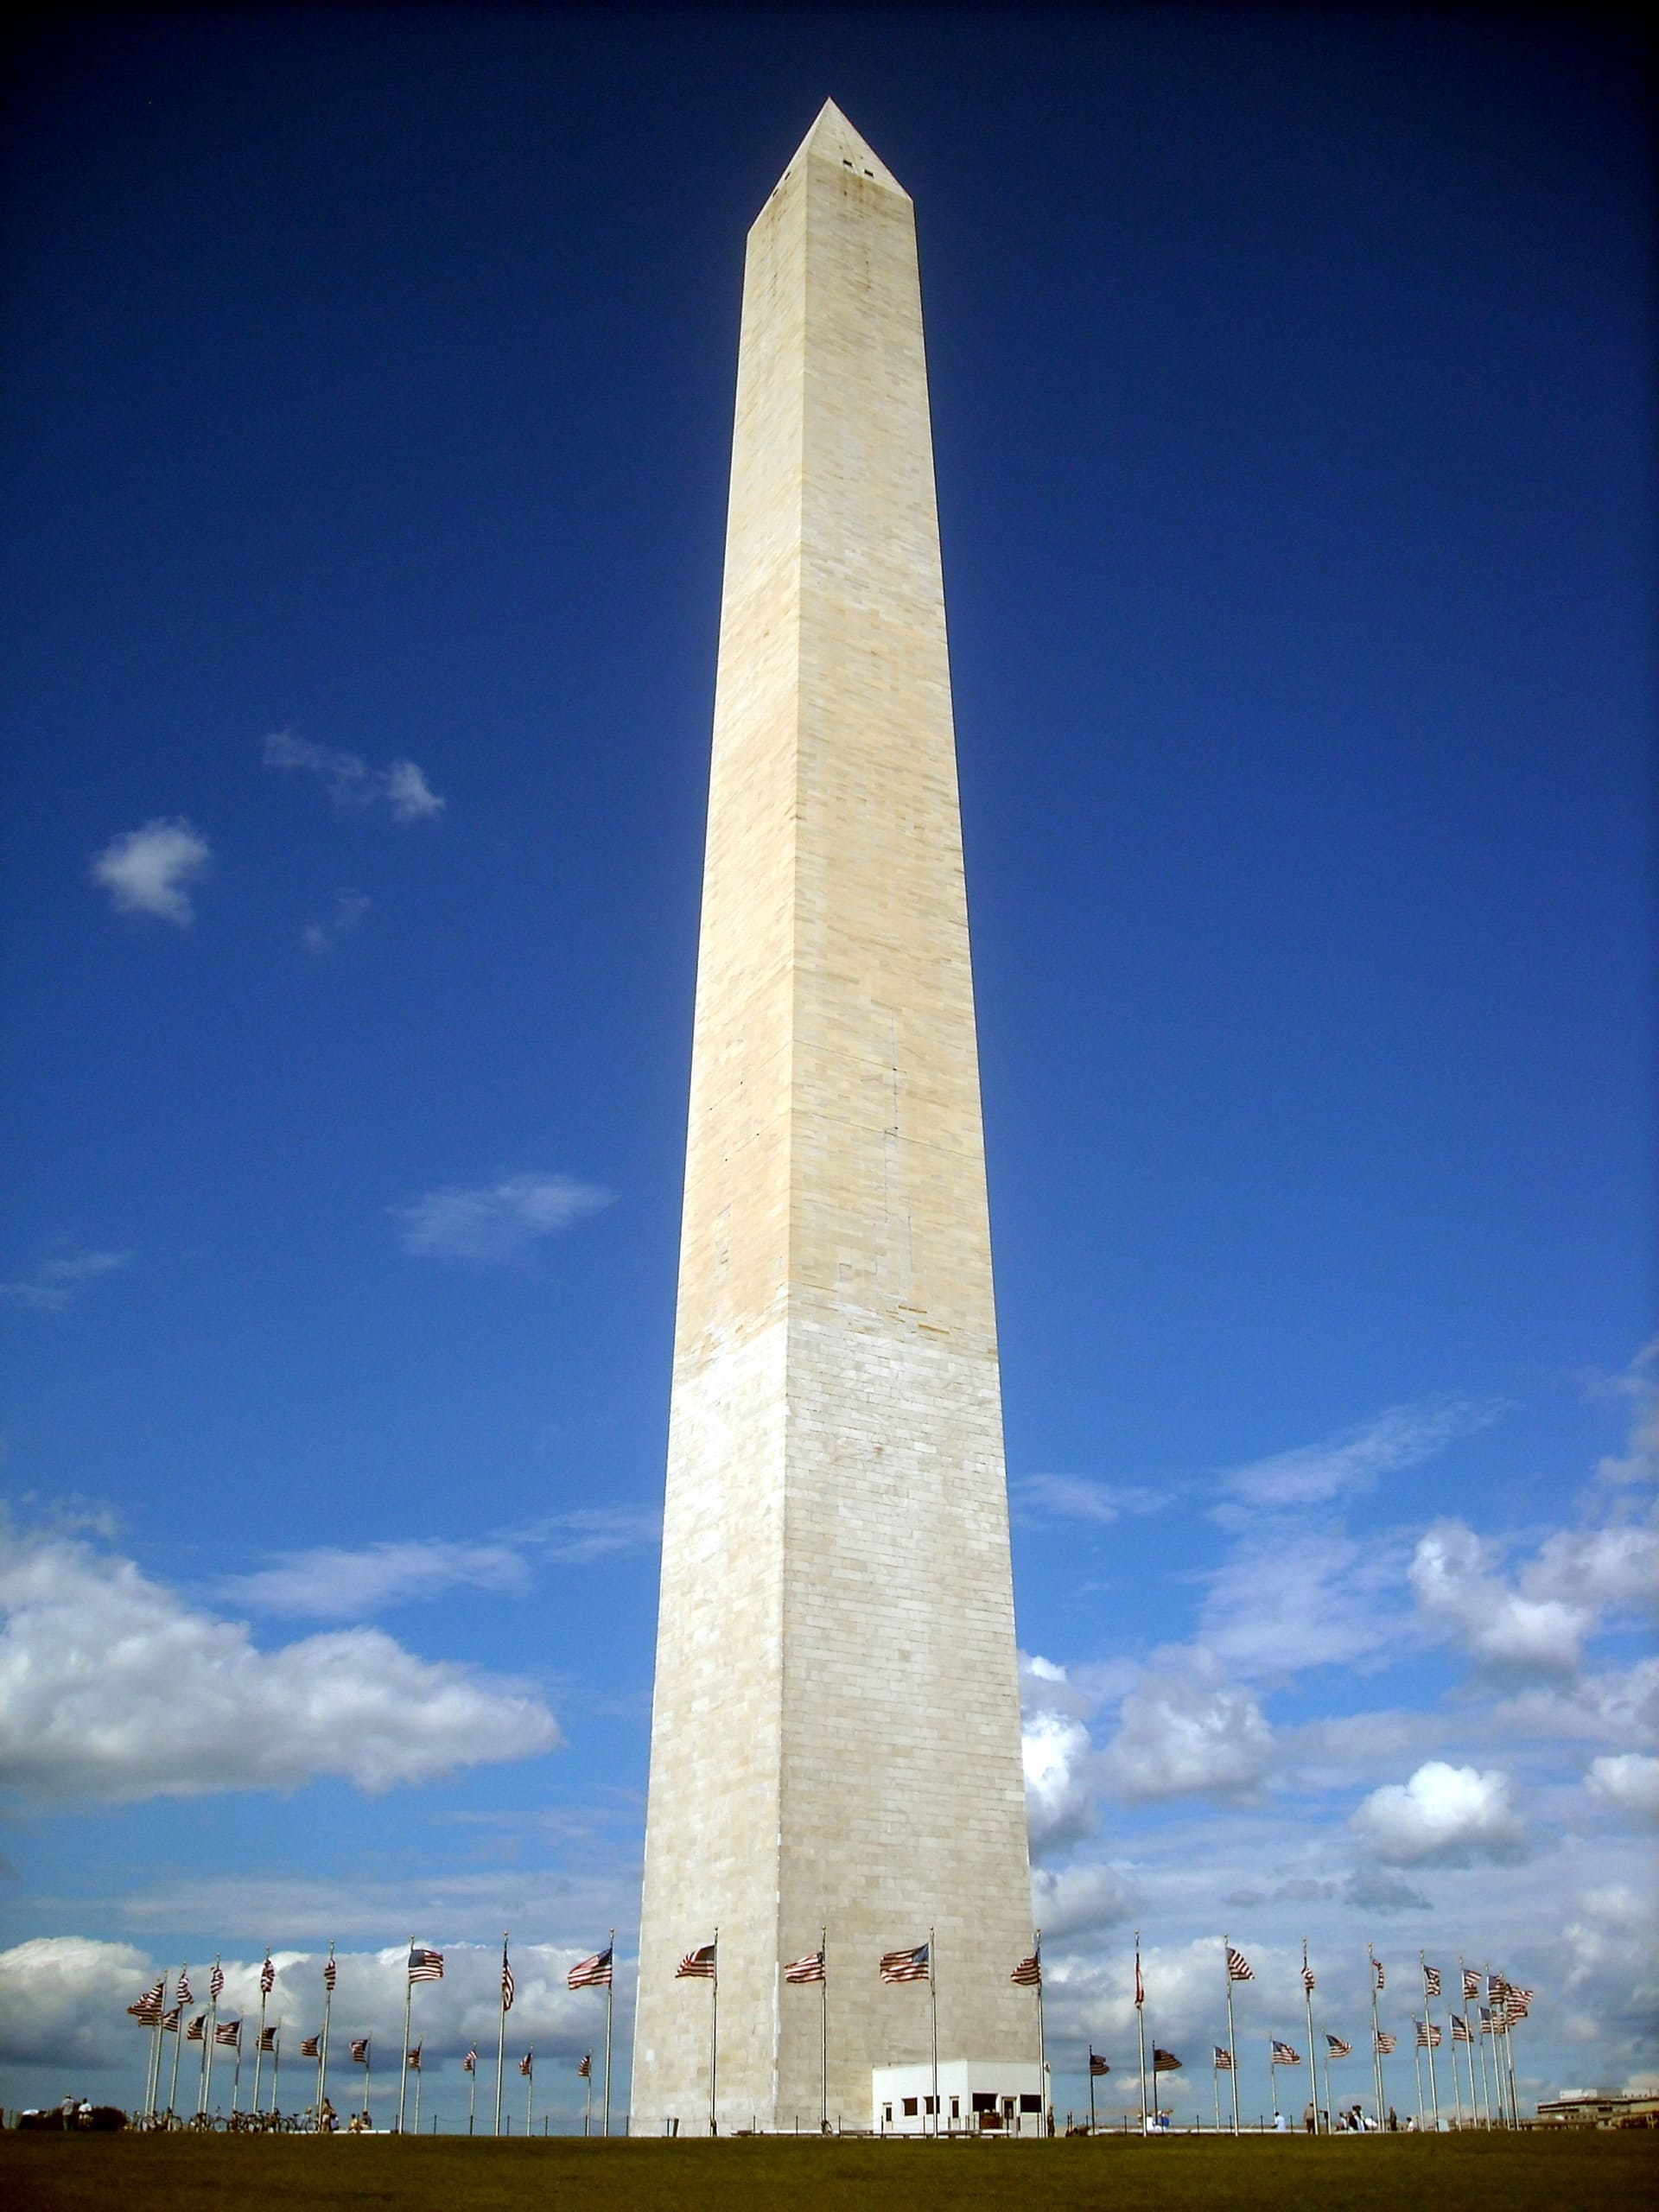 The Washington Monument honors George Washington for his military and political achievements and resembles an Ancient Egyptian obelisk.